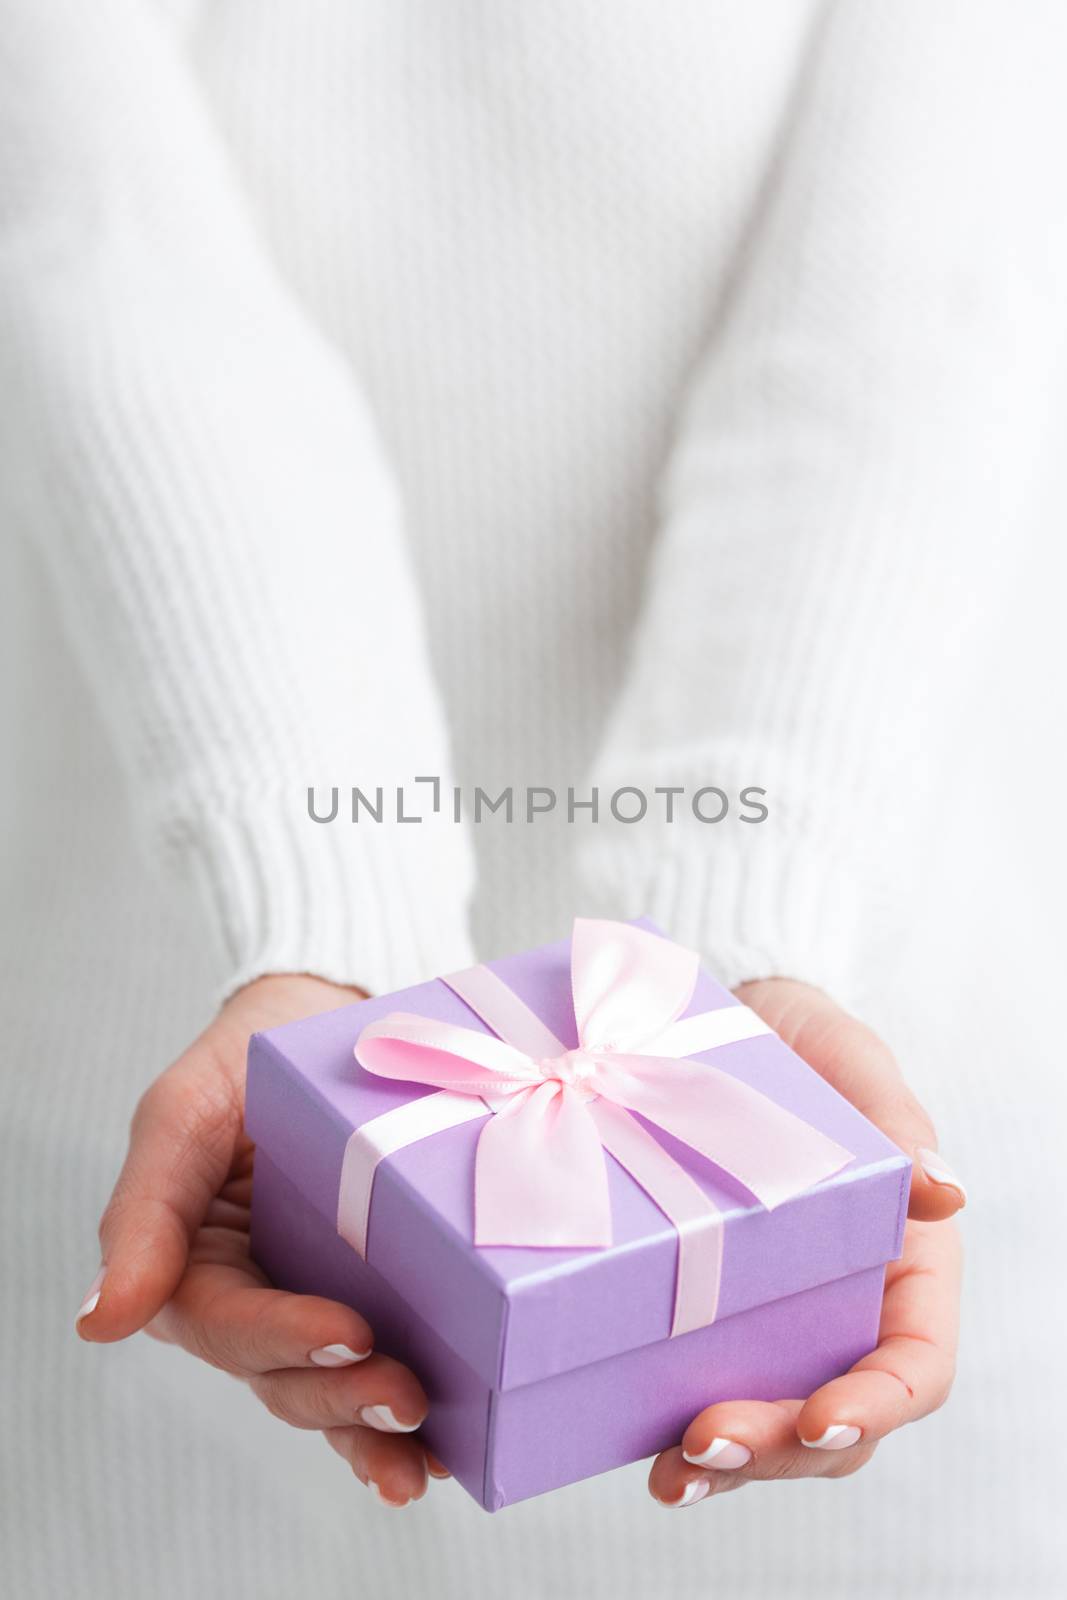 Hands holding gift box by Yellowj